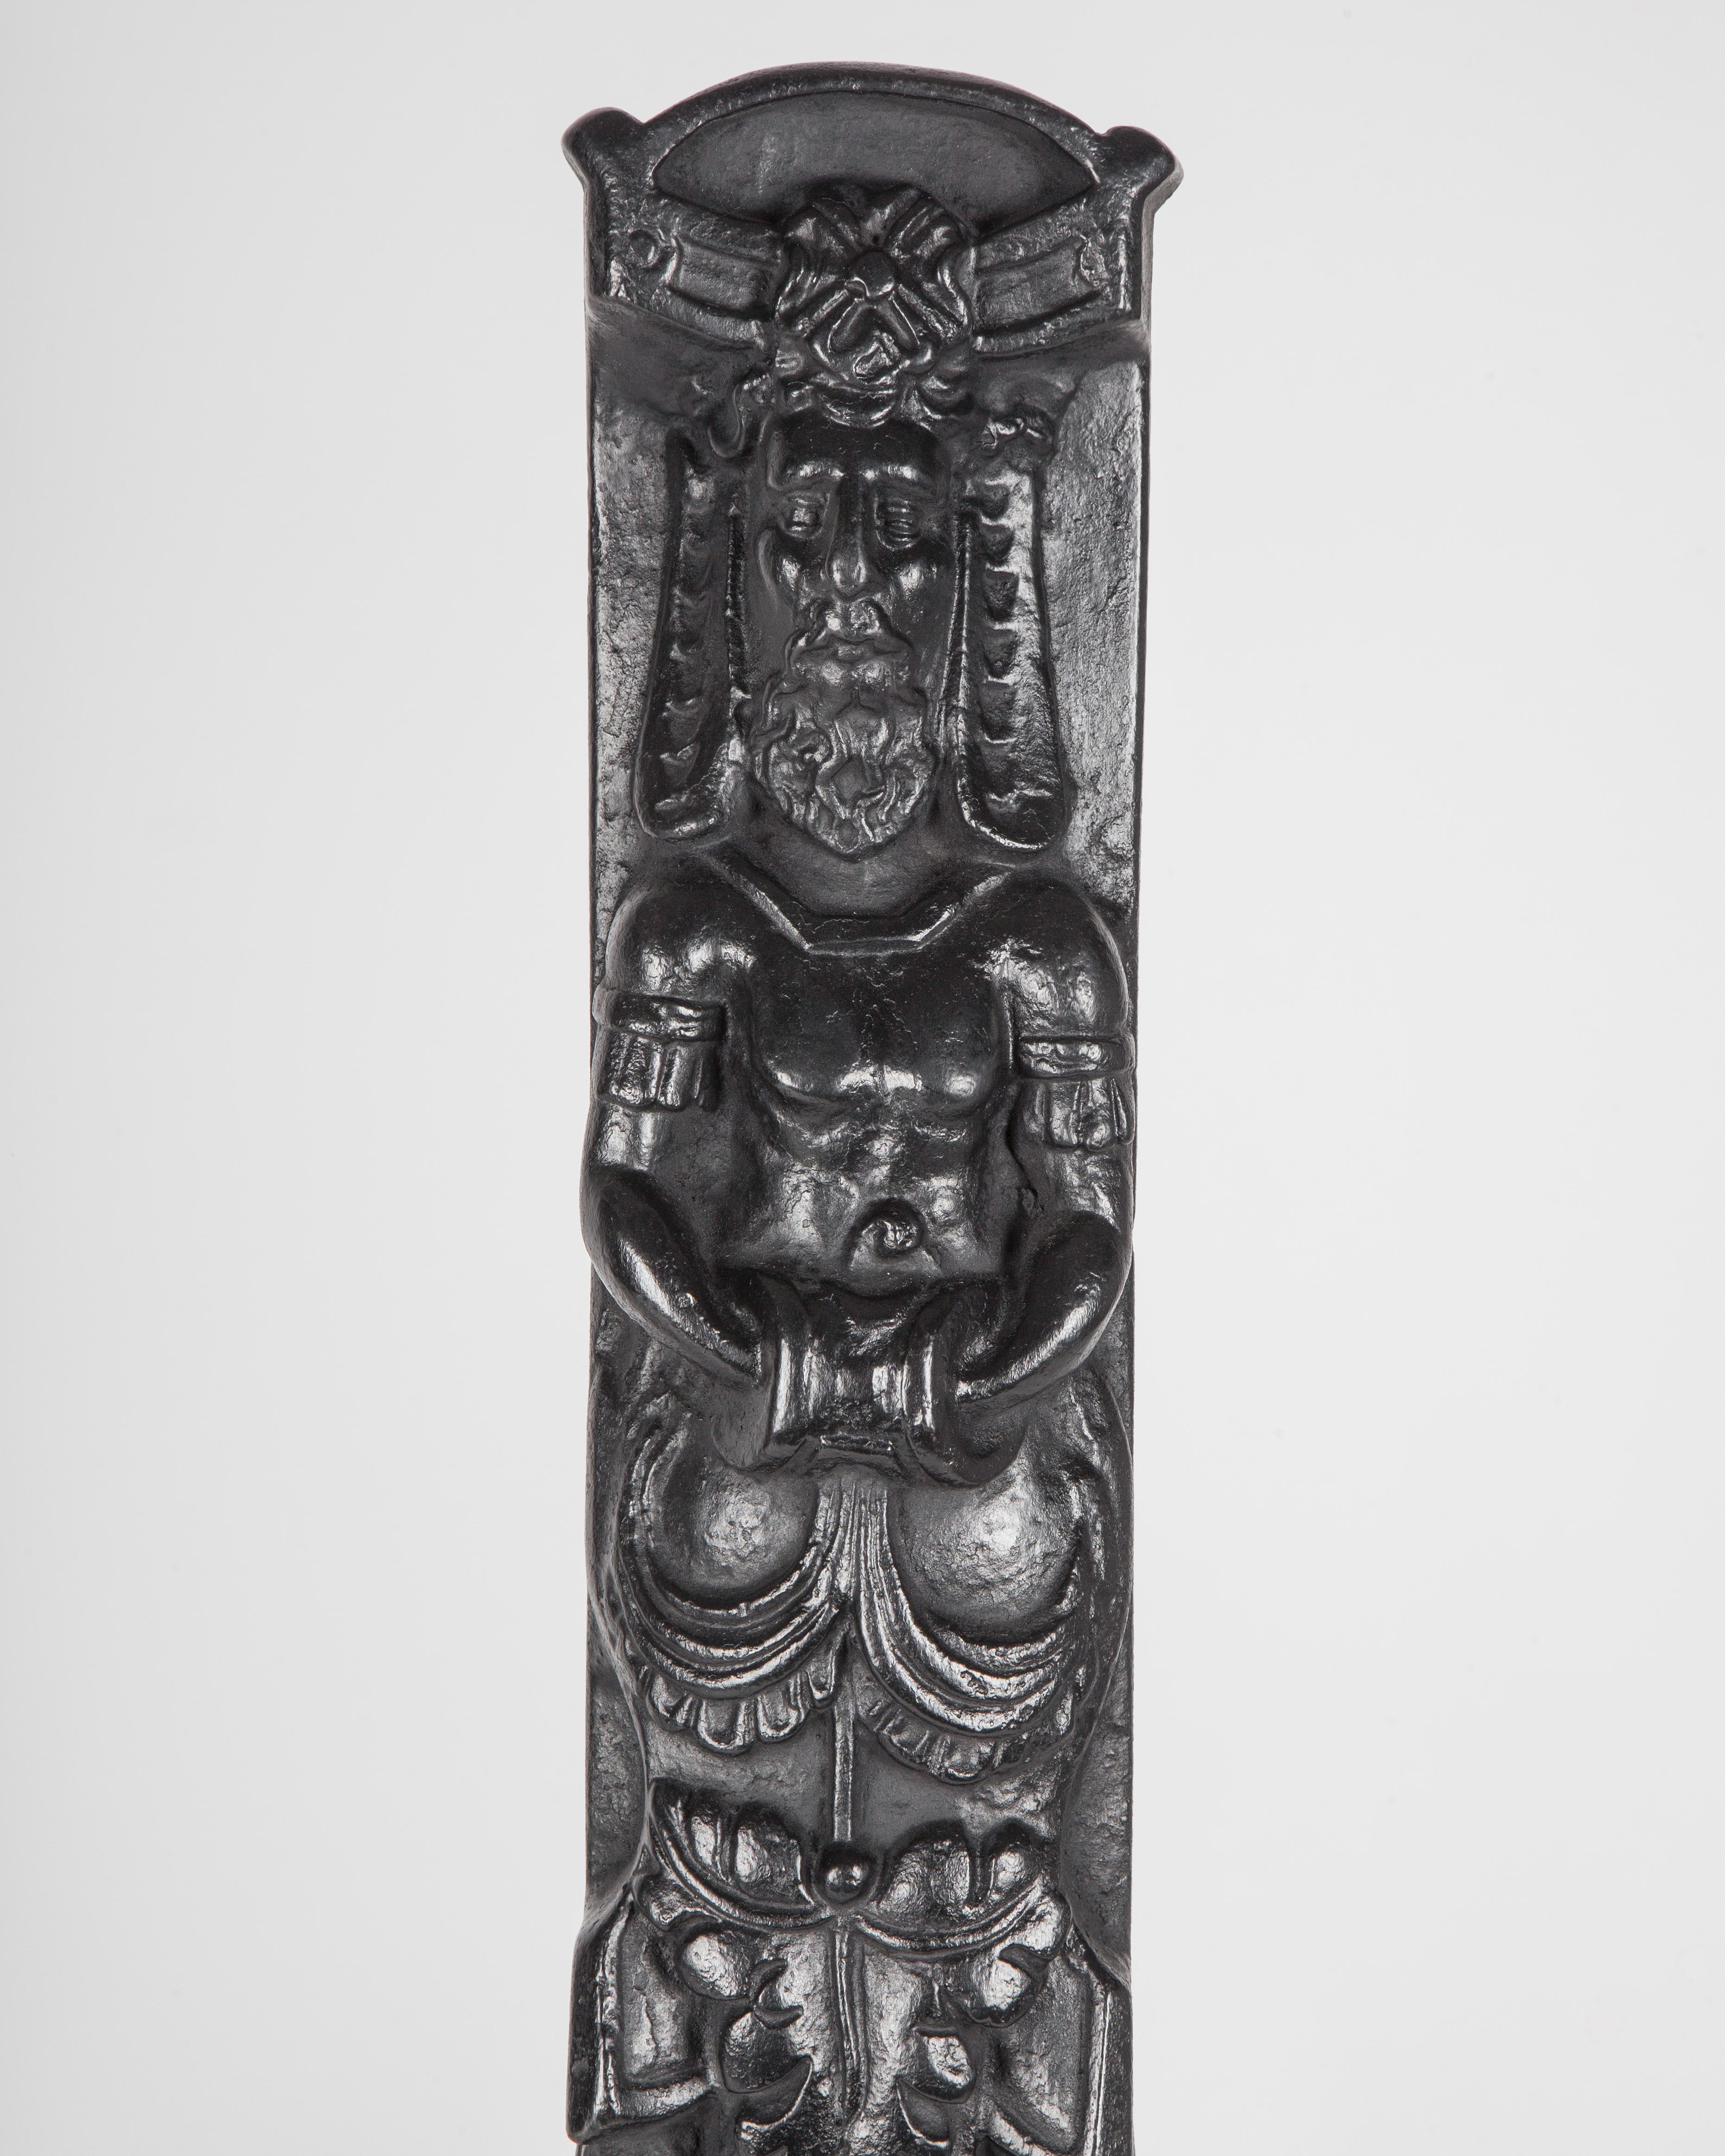 AFP0674
A pair of unusual large antique andirons each having a figure of a hybrid atlas over a caduceus in the main rectangular column, as well as masks, dolphin fish and crosses on the curves of the legs. In cast iron with a blackened finish. From